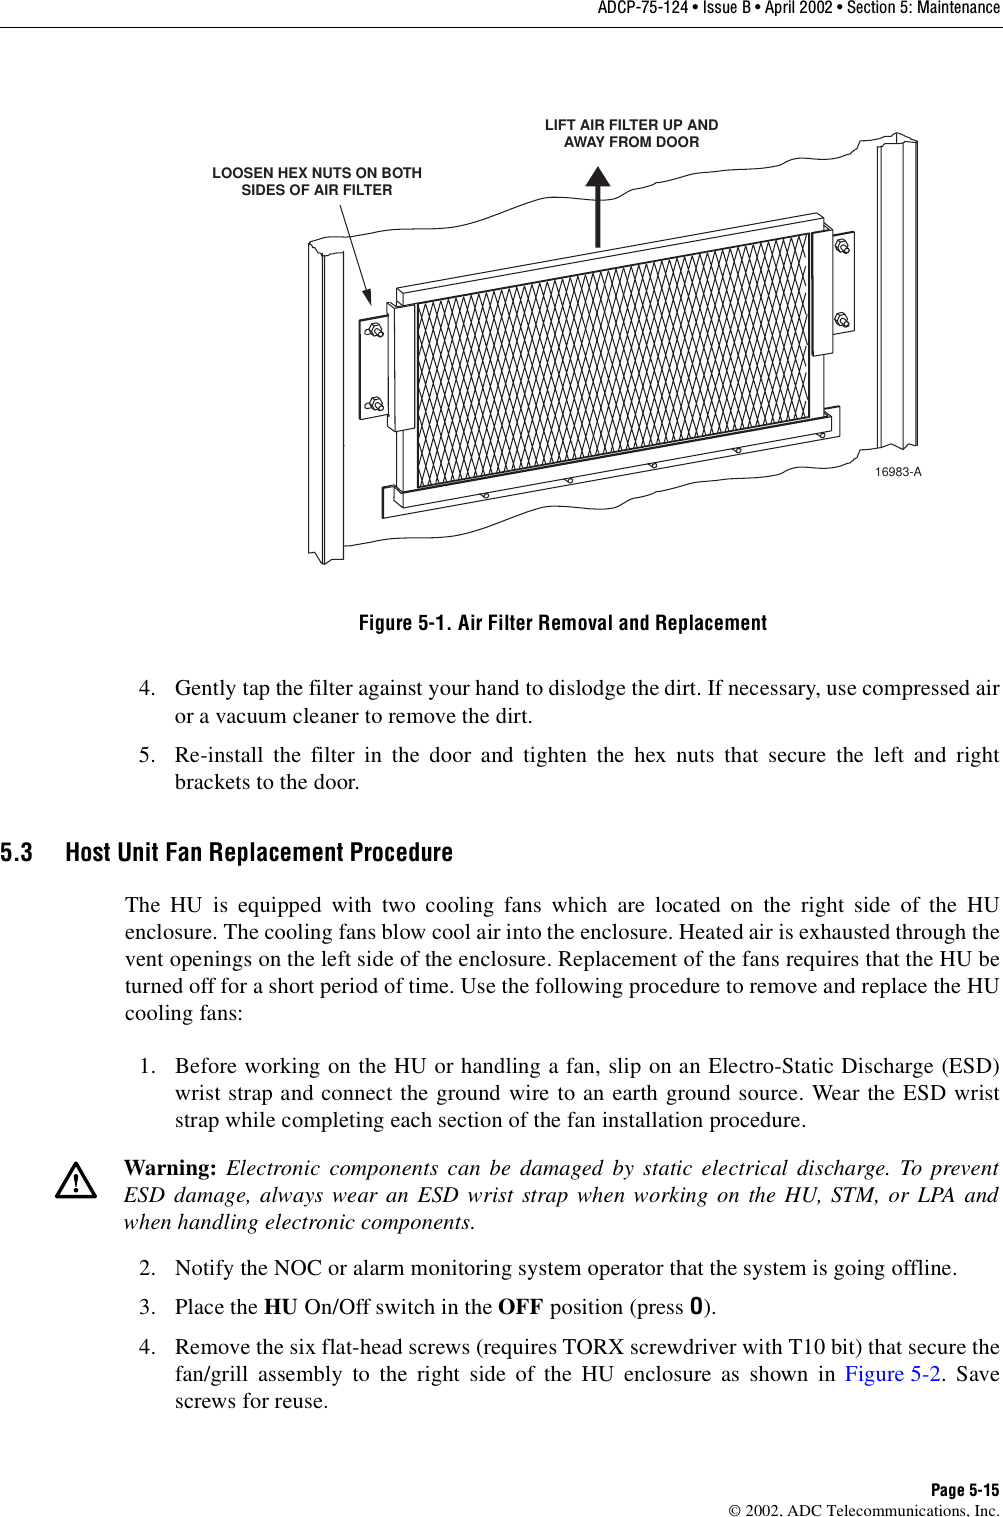 ADCP-75-124 • Issue B • April 2002 • Section 5: MaintenancePage 5-15©2002, ADC Telecommunications, Inc.Figure 5-1. Air Filter Removal and Replacement4. Gently tap the filter against your hand to dislodge the dirt. If necessary, use compressed airor avacuum cleaner to remove the dirt.5. Re-install the filter in the door and tighten the hex nuts that secure the left and rightbrackets to the door.5.3 Host Unit Fan Replacement ProcedureThe HU is equipped with two cooling fans which are located on the right side of the HUenclosure. The cooling fans blow cool air into the enclosure. Heated air is exhausted through thevent openings on the left side of the enclosure. Replacement of the fans requires that the HU beturned off for ashort period of time. Use the following procedure to remove and replace the HUcooling fans:1. Before working on the HU or handling afan, slip on an Electro-Static Discharge (ESD)wrist strap and connect the ground wire to an earth ground source. Wear the ESD wriststrap while completing each section of the fan installation procedure.2. Notify the NOC or alarm monitoring system operator that the system is going offline.3. Place the HU On/Off switch in the OFF position (press O).4. Remove the six flat-head screws (requires TORX screwdriver with T10 bit) that secure thefan/grill assembly to the right side of the HU enclosure as shown in Figure 5-2.Savescrews for reuse.Warning: Electronic components can be damaged by static electrical discharge. To preventESD damage, always wear an ESD wrist strap when working on the HU, STM, or LPA andwhen handling electronic components.LOOSEN HEX NUTS ON BOTHSIDES OF AIR FILTERLIFT AIR FILTER UP ANDAWAY FROM DOOR16983-A